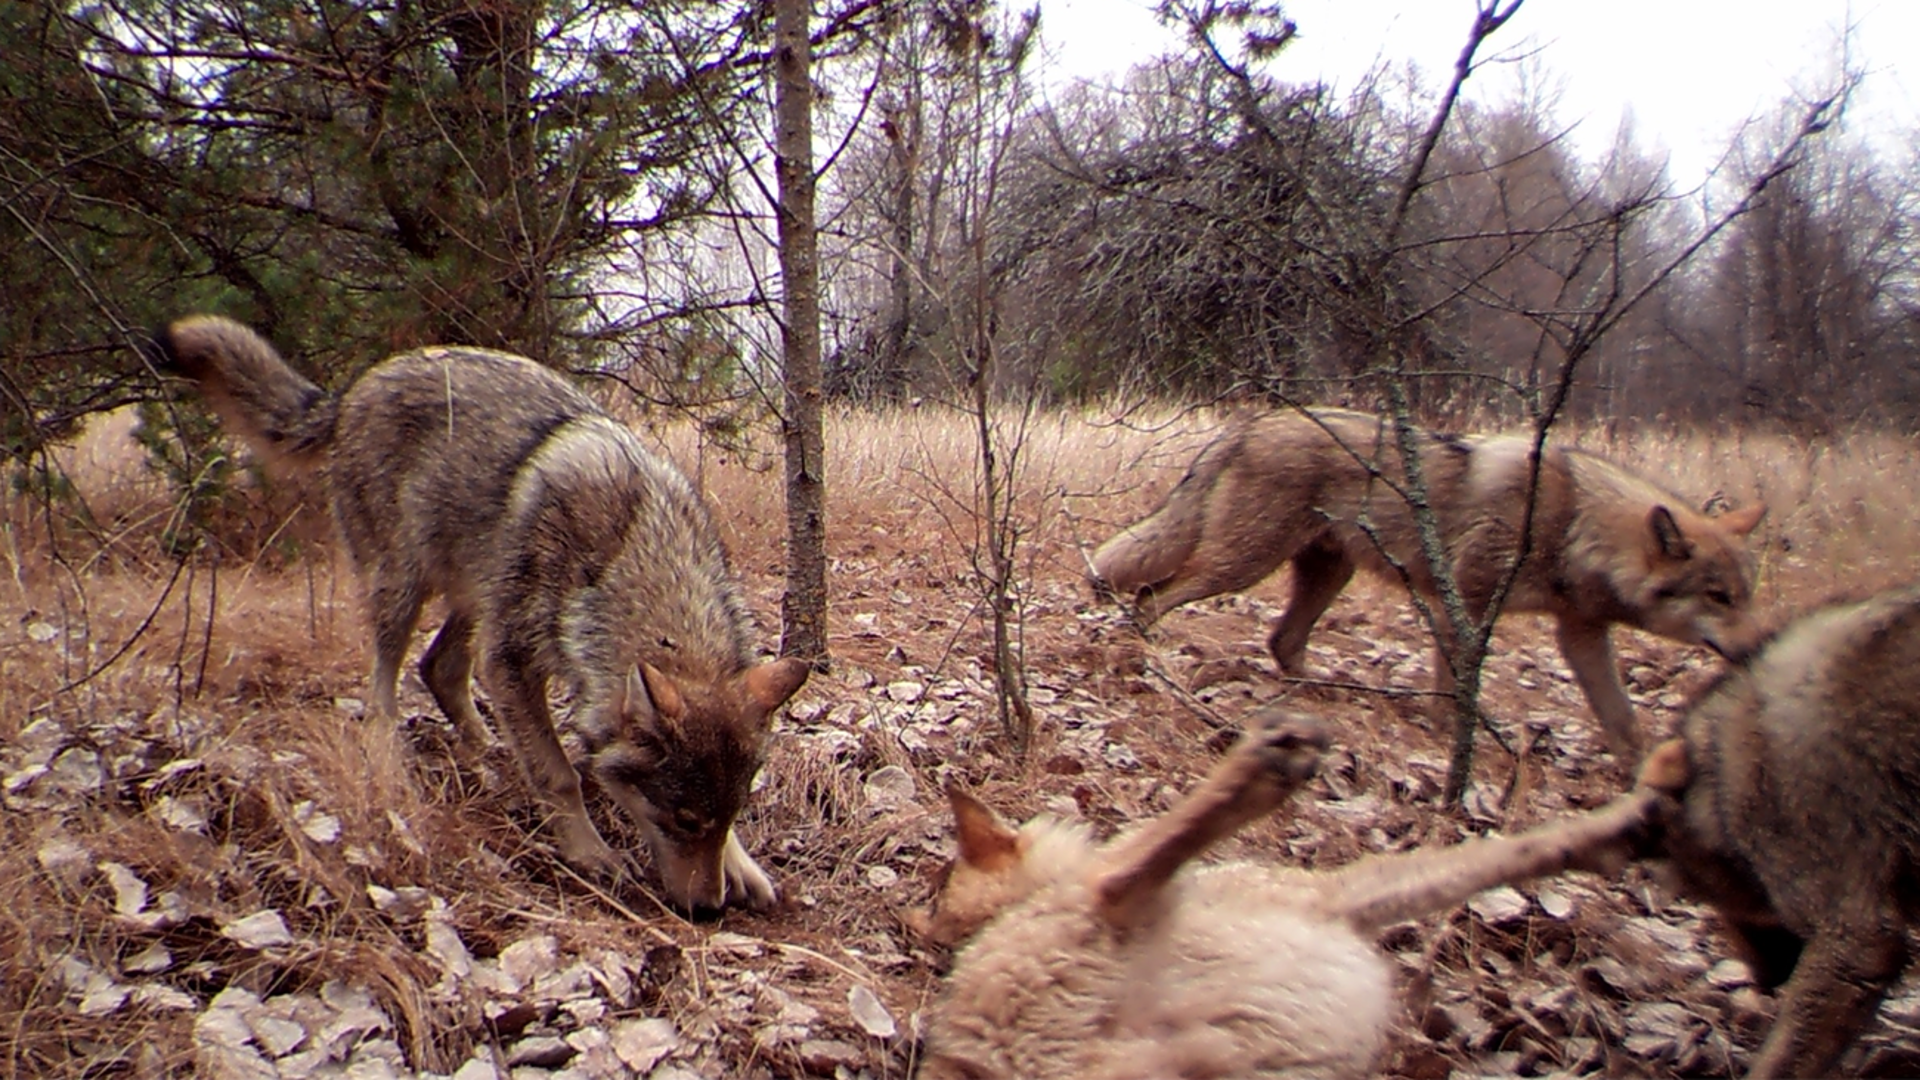 Chernobyl is a wildlife haven after 38 years of nuclear disaster [Video]